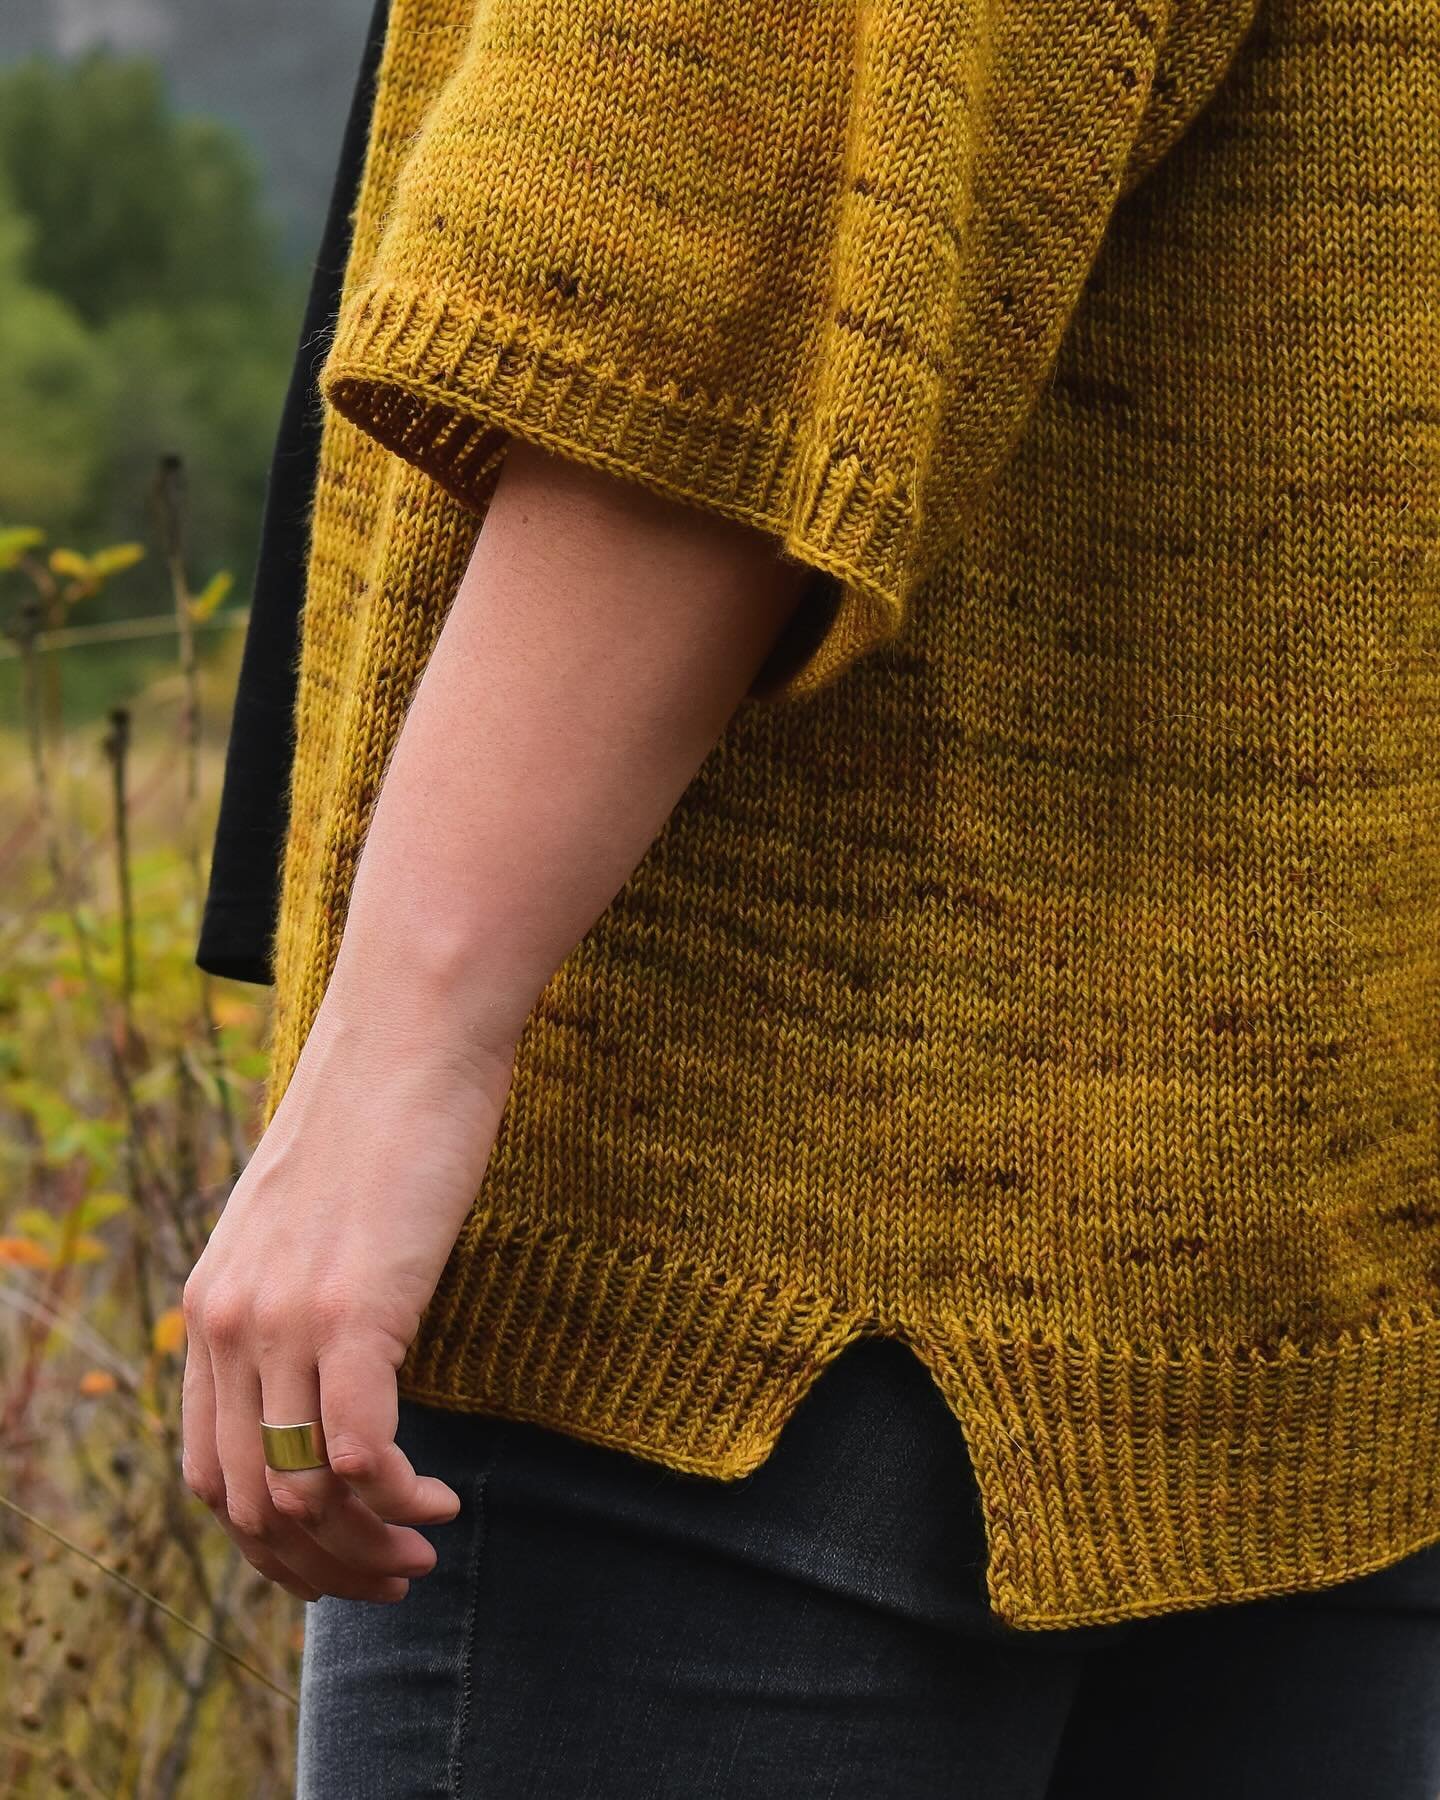 It&rsquo;s starting to feel like spring here, and you know what that means &mdash; lightweight, oversized, open-front cardigans 💛🌻🌞

This one is Aurea, and it was the perfect layer this morning while I walked Georgia to school. Want to make one of